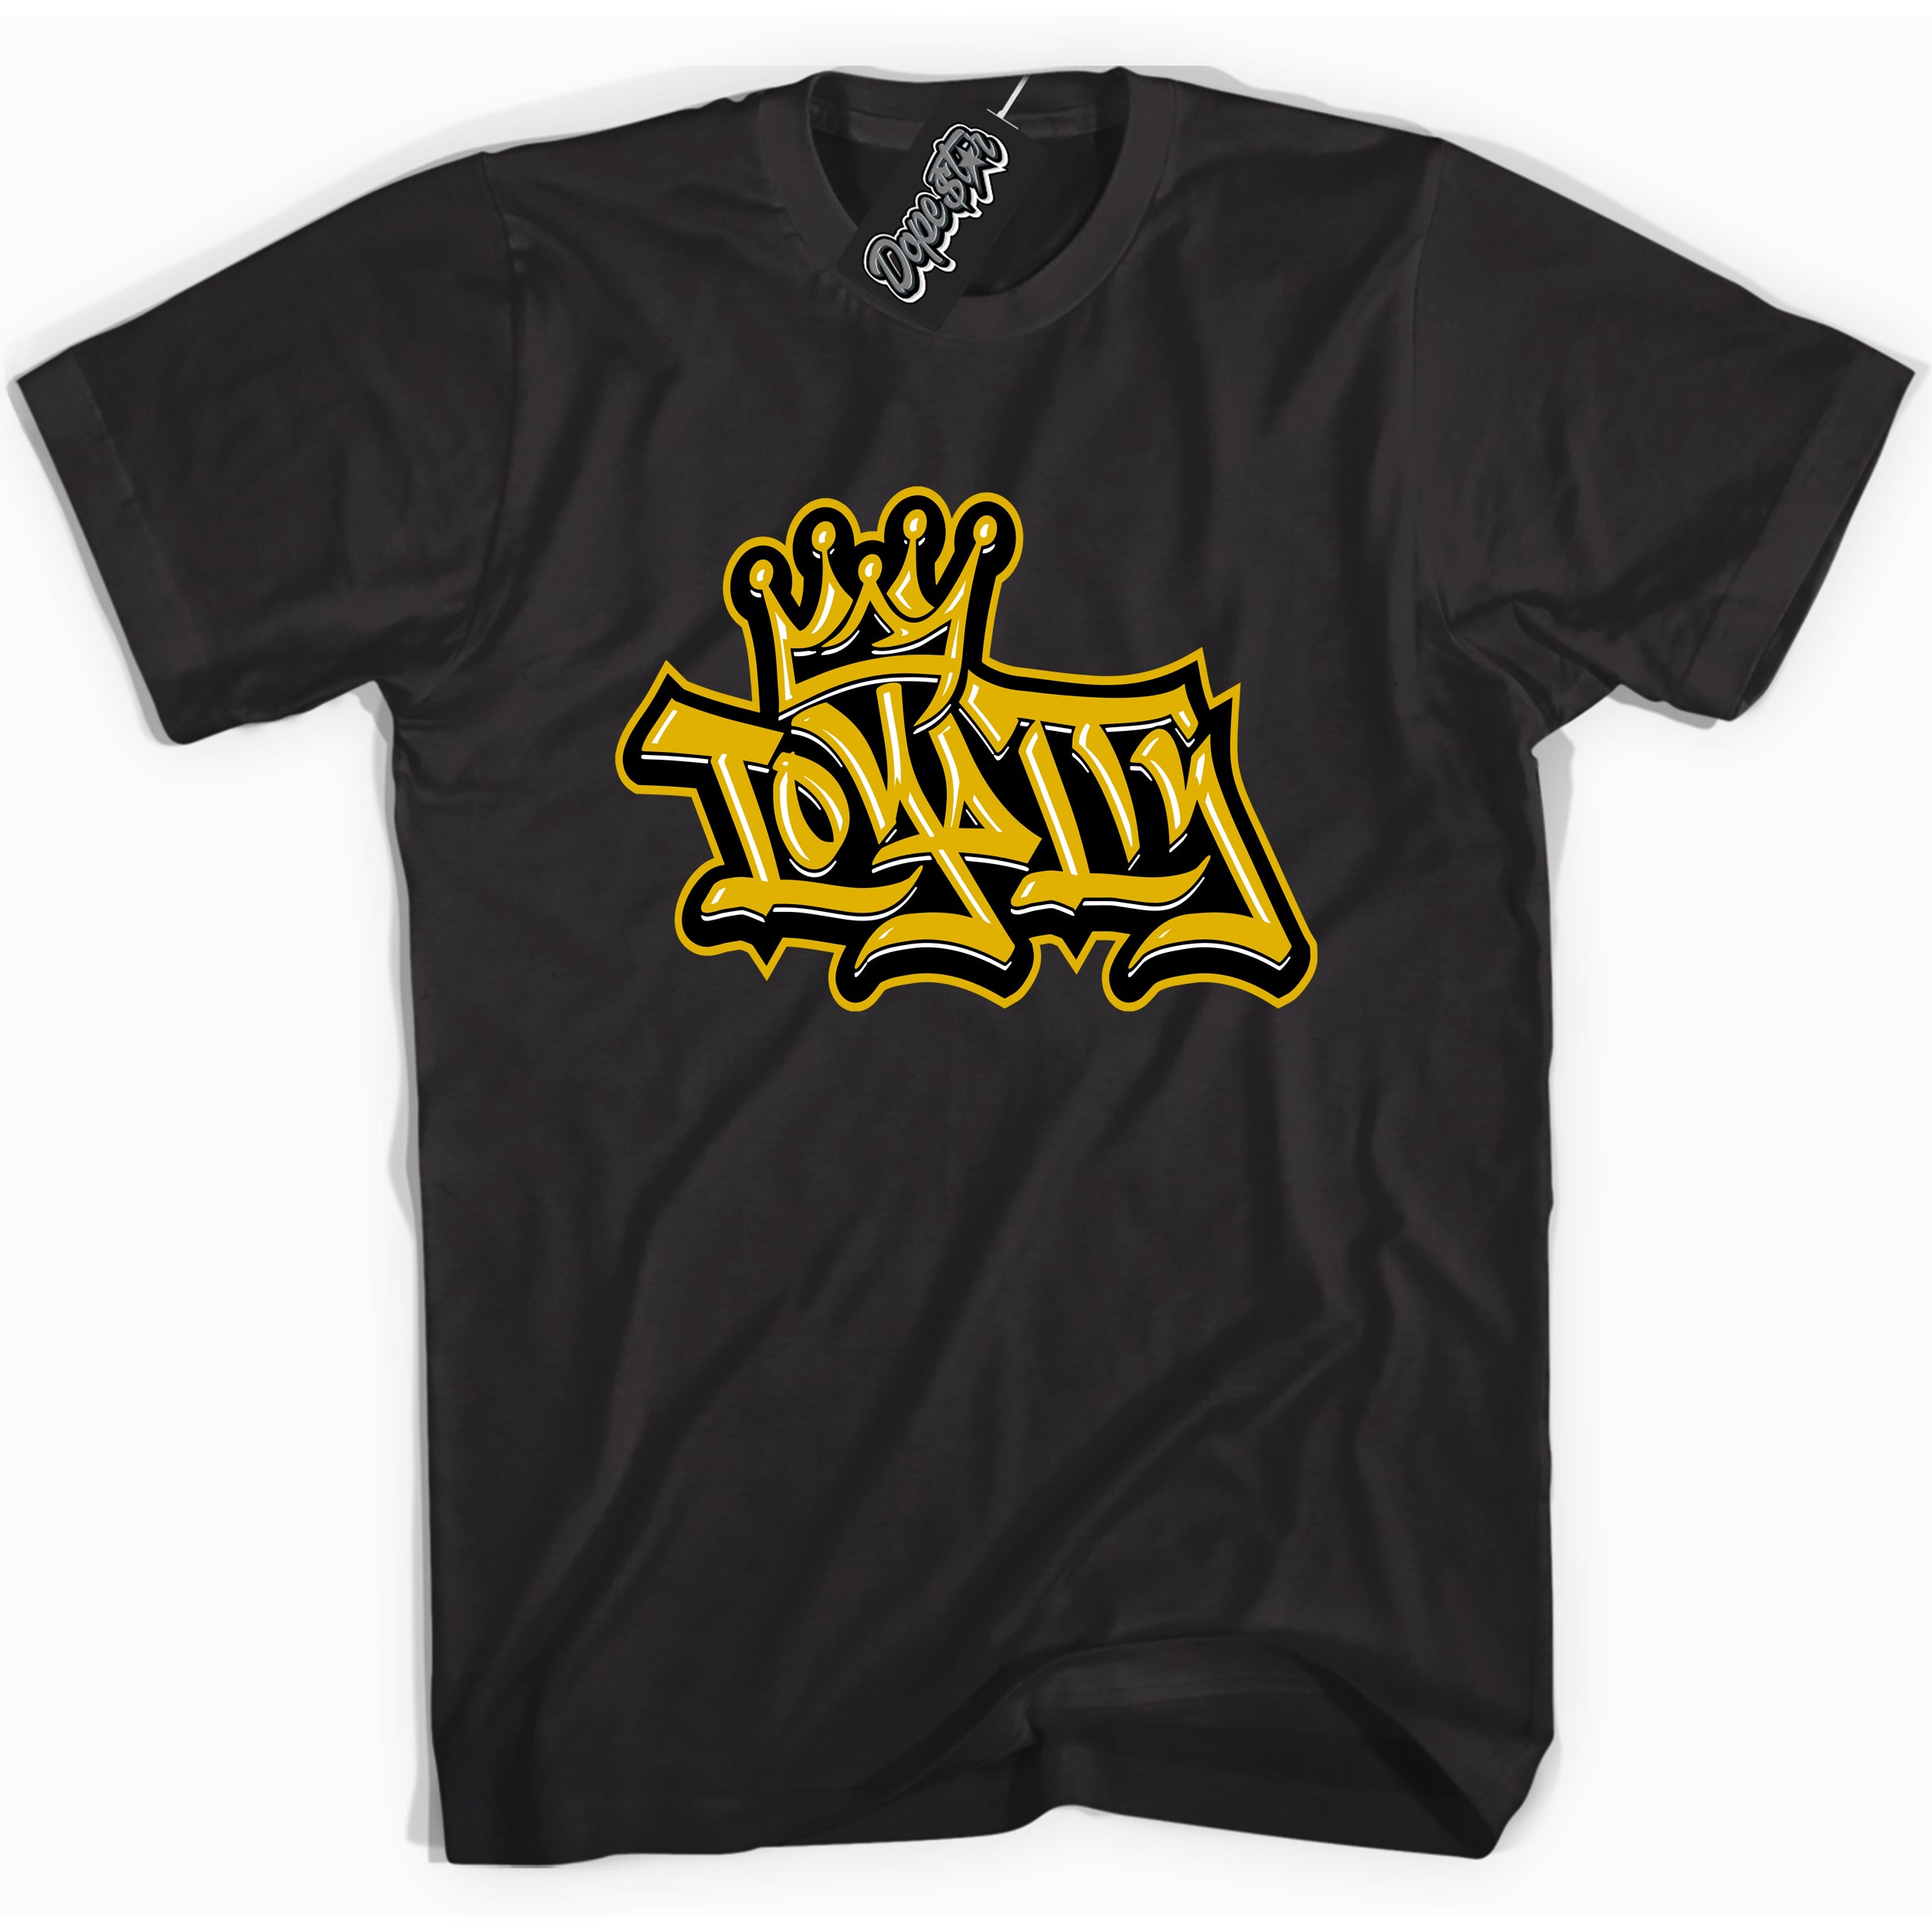 Cool Black Shirt with “ Loyalty Crown ” design that perfectly matches Yellow Ochre 6s Sneakers.